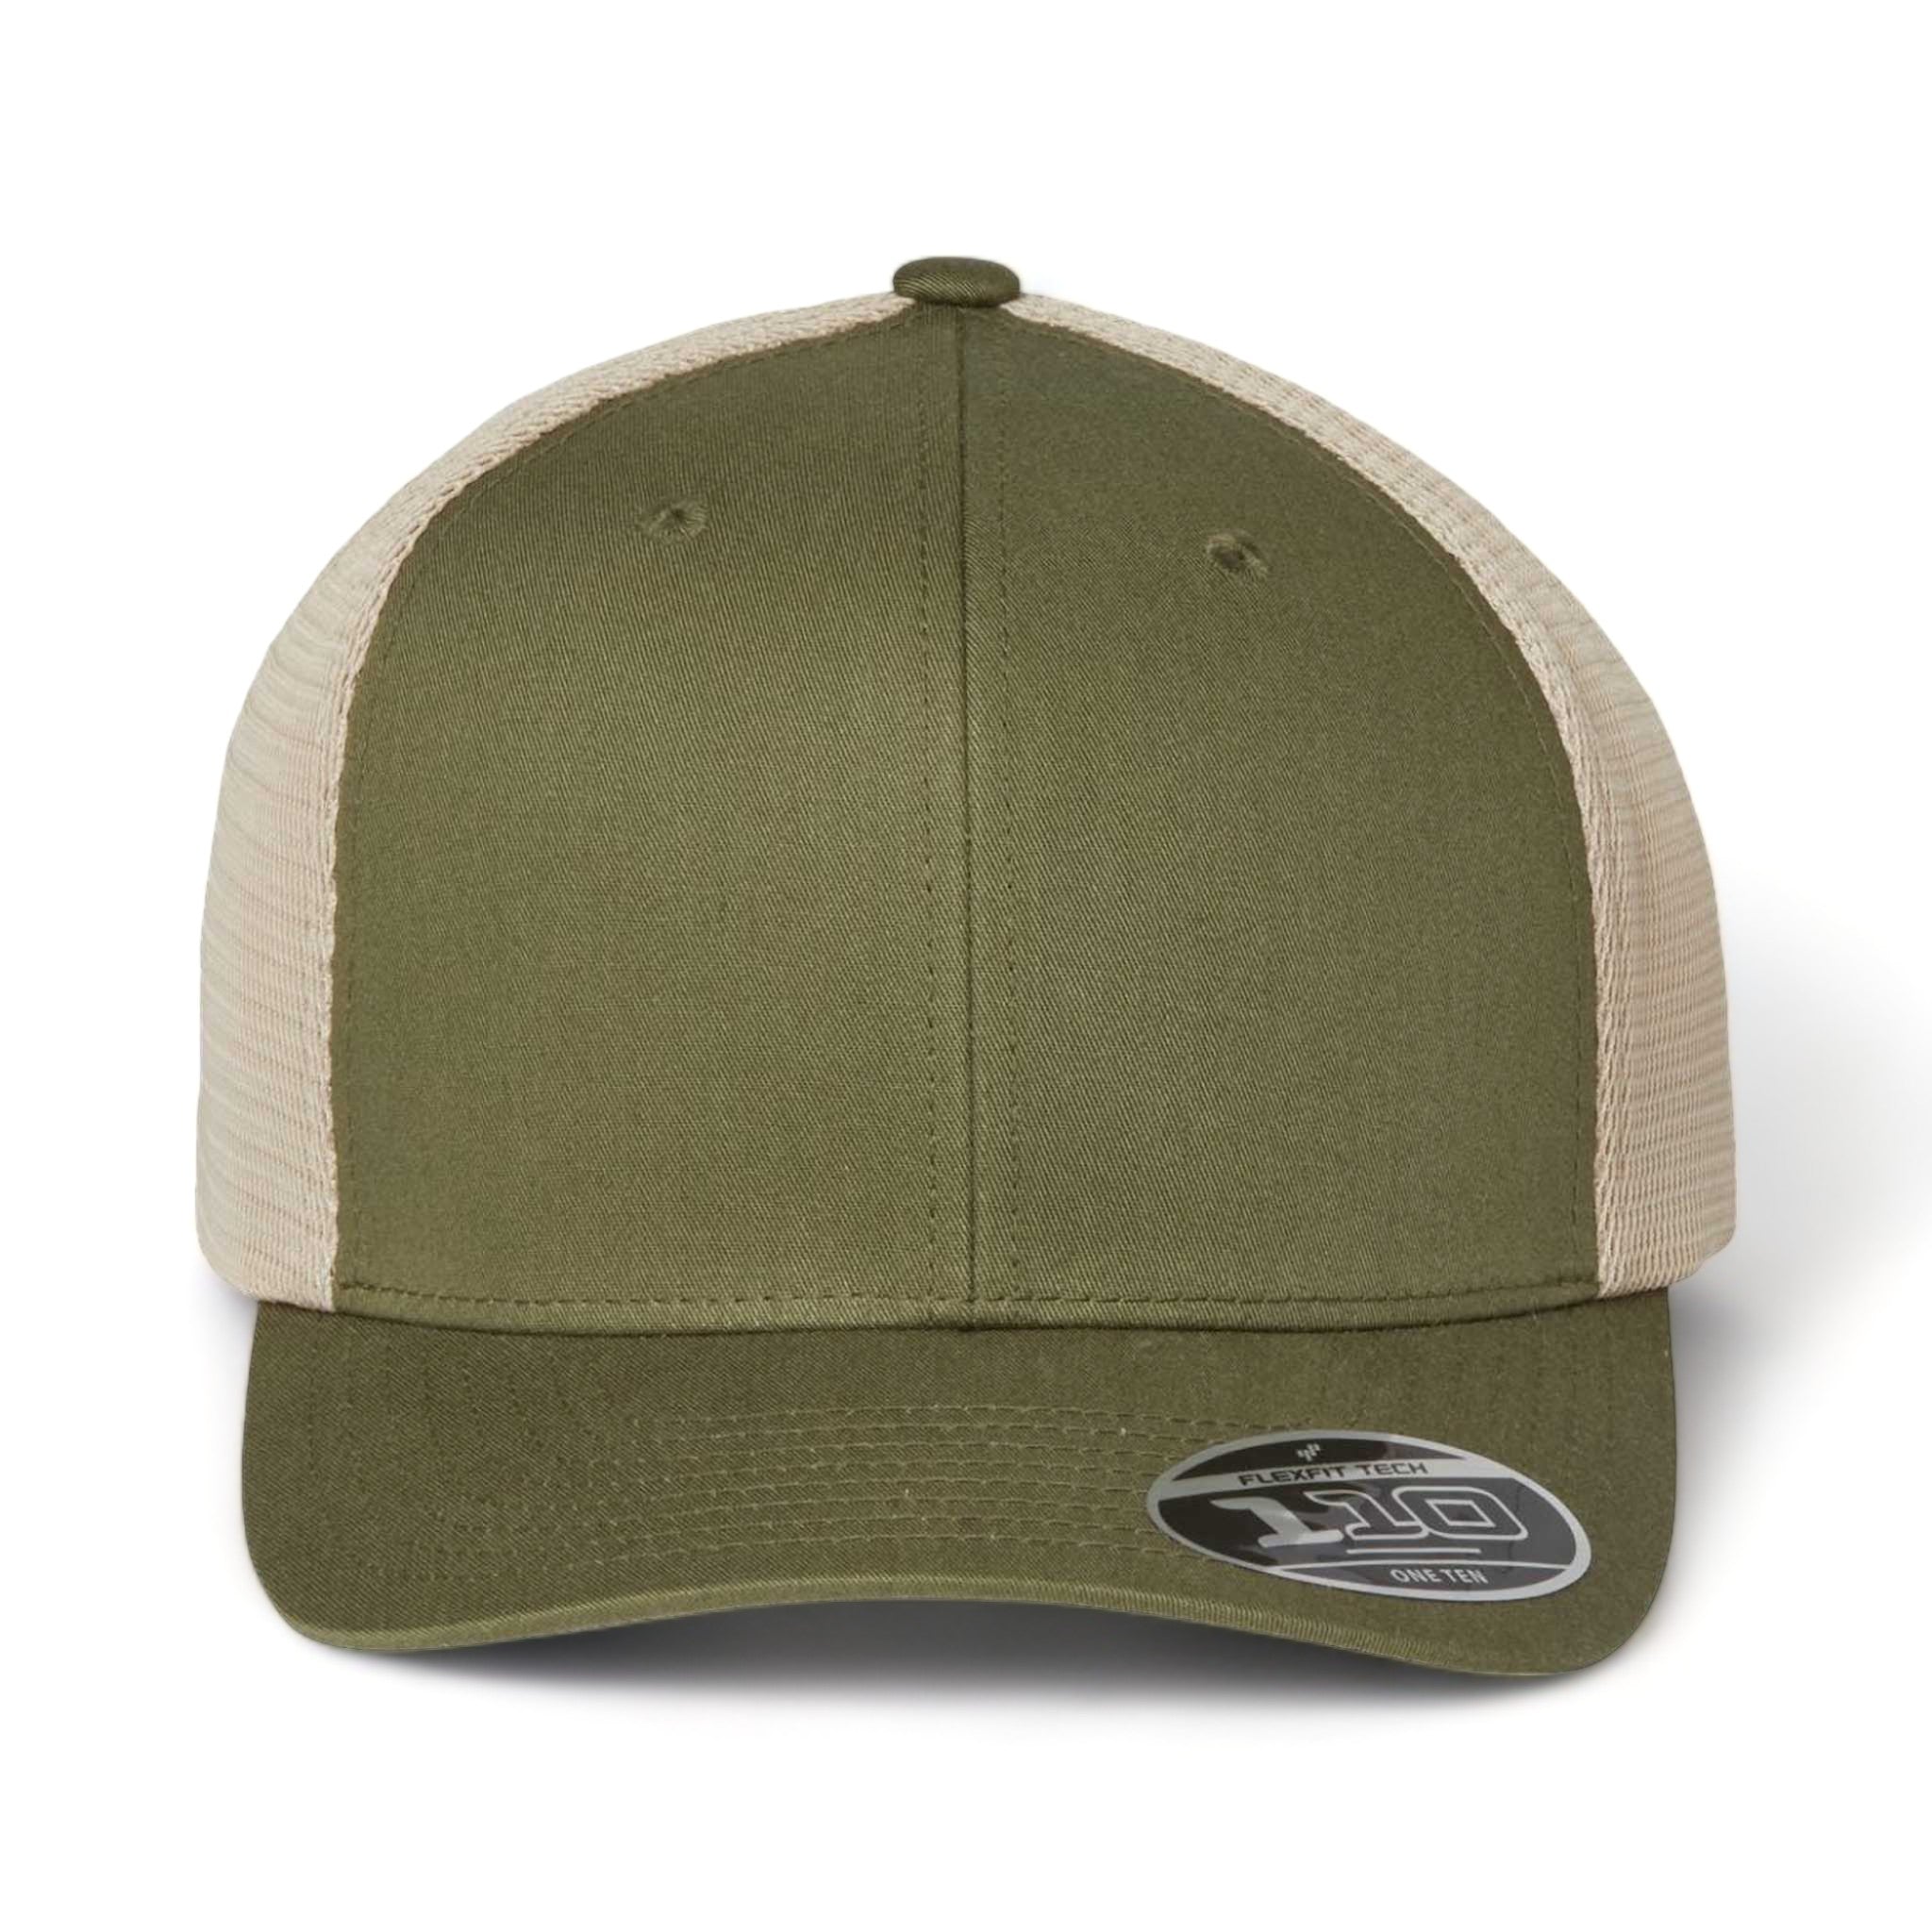 Front view of Flexfit 110M custom hat in olive and khaki